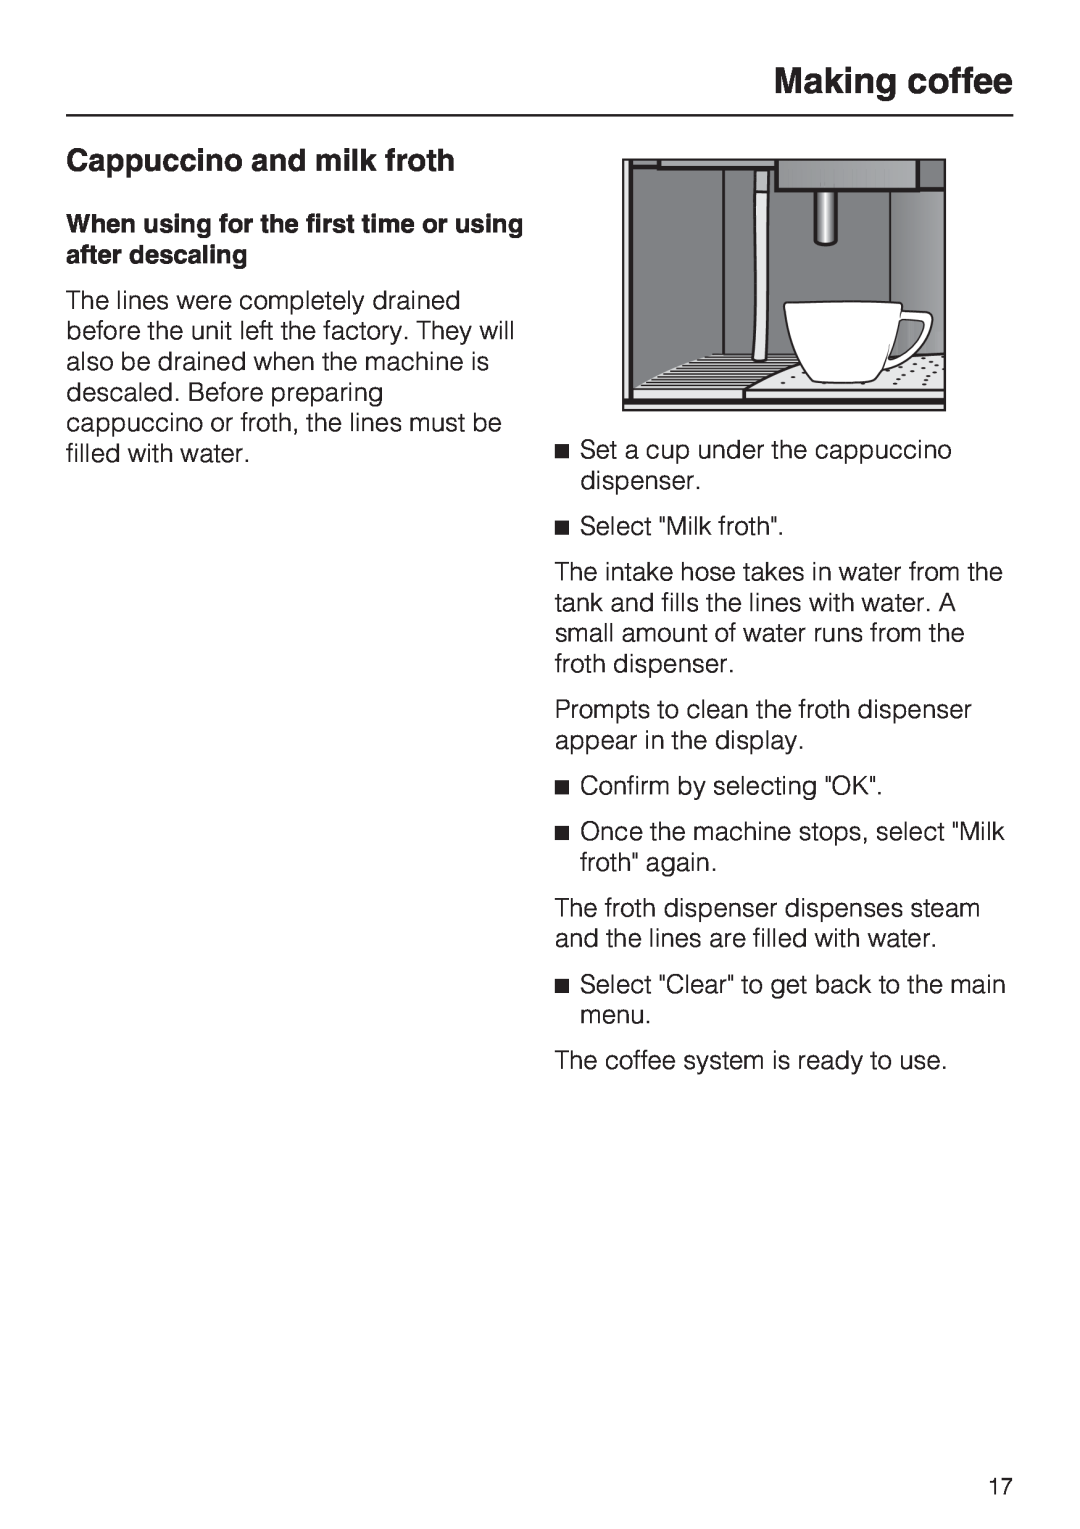 Miele CVA4075 installation instructions Cappuccino and milk froth, Making coffee 